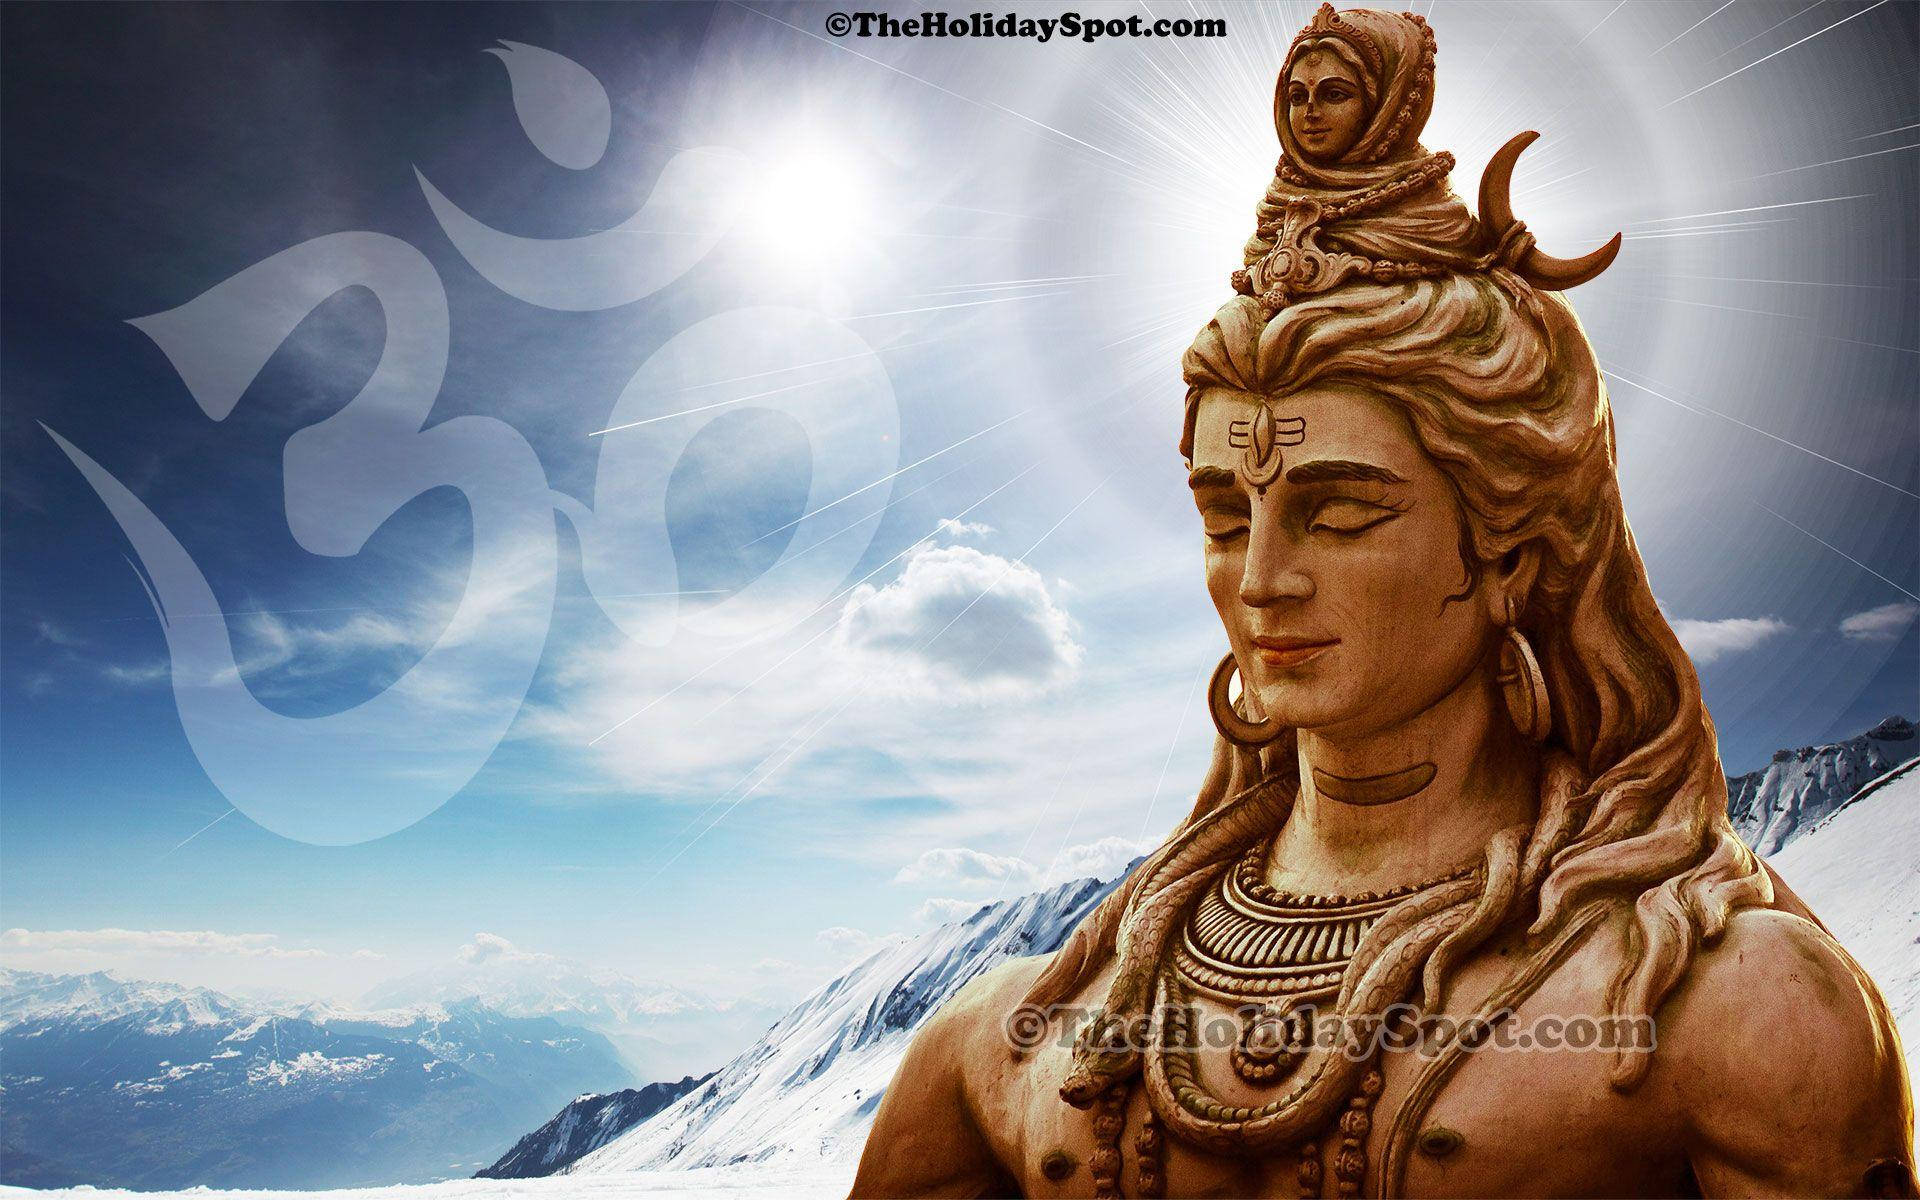 Lord Shiva In Snow Mountain Background